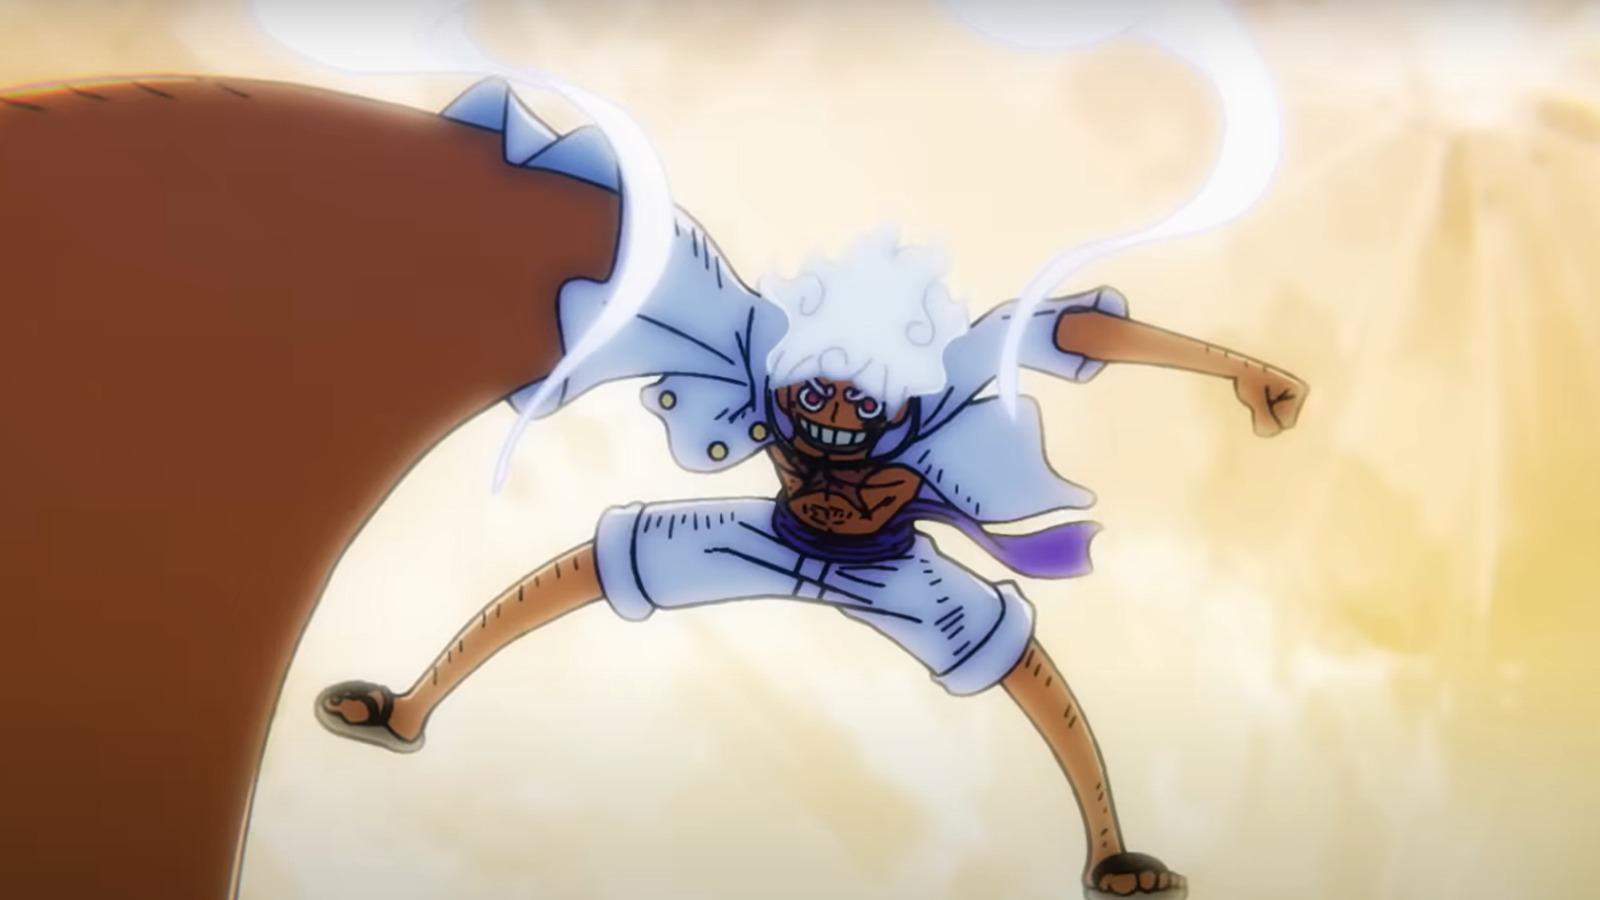 One Piece Chapter 1044: Luffy Awakens GEAR 5th As JoyBoy & Luffy's Real  Devil Fruit Reveal ! 